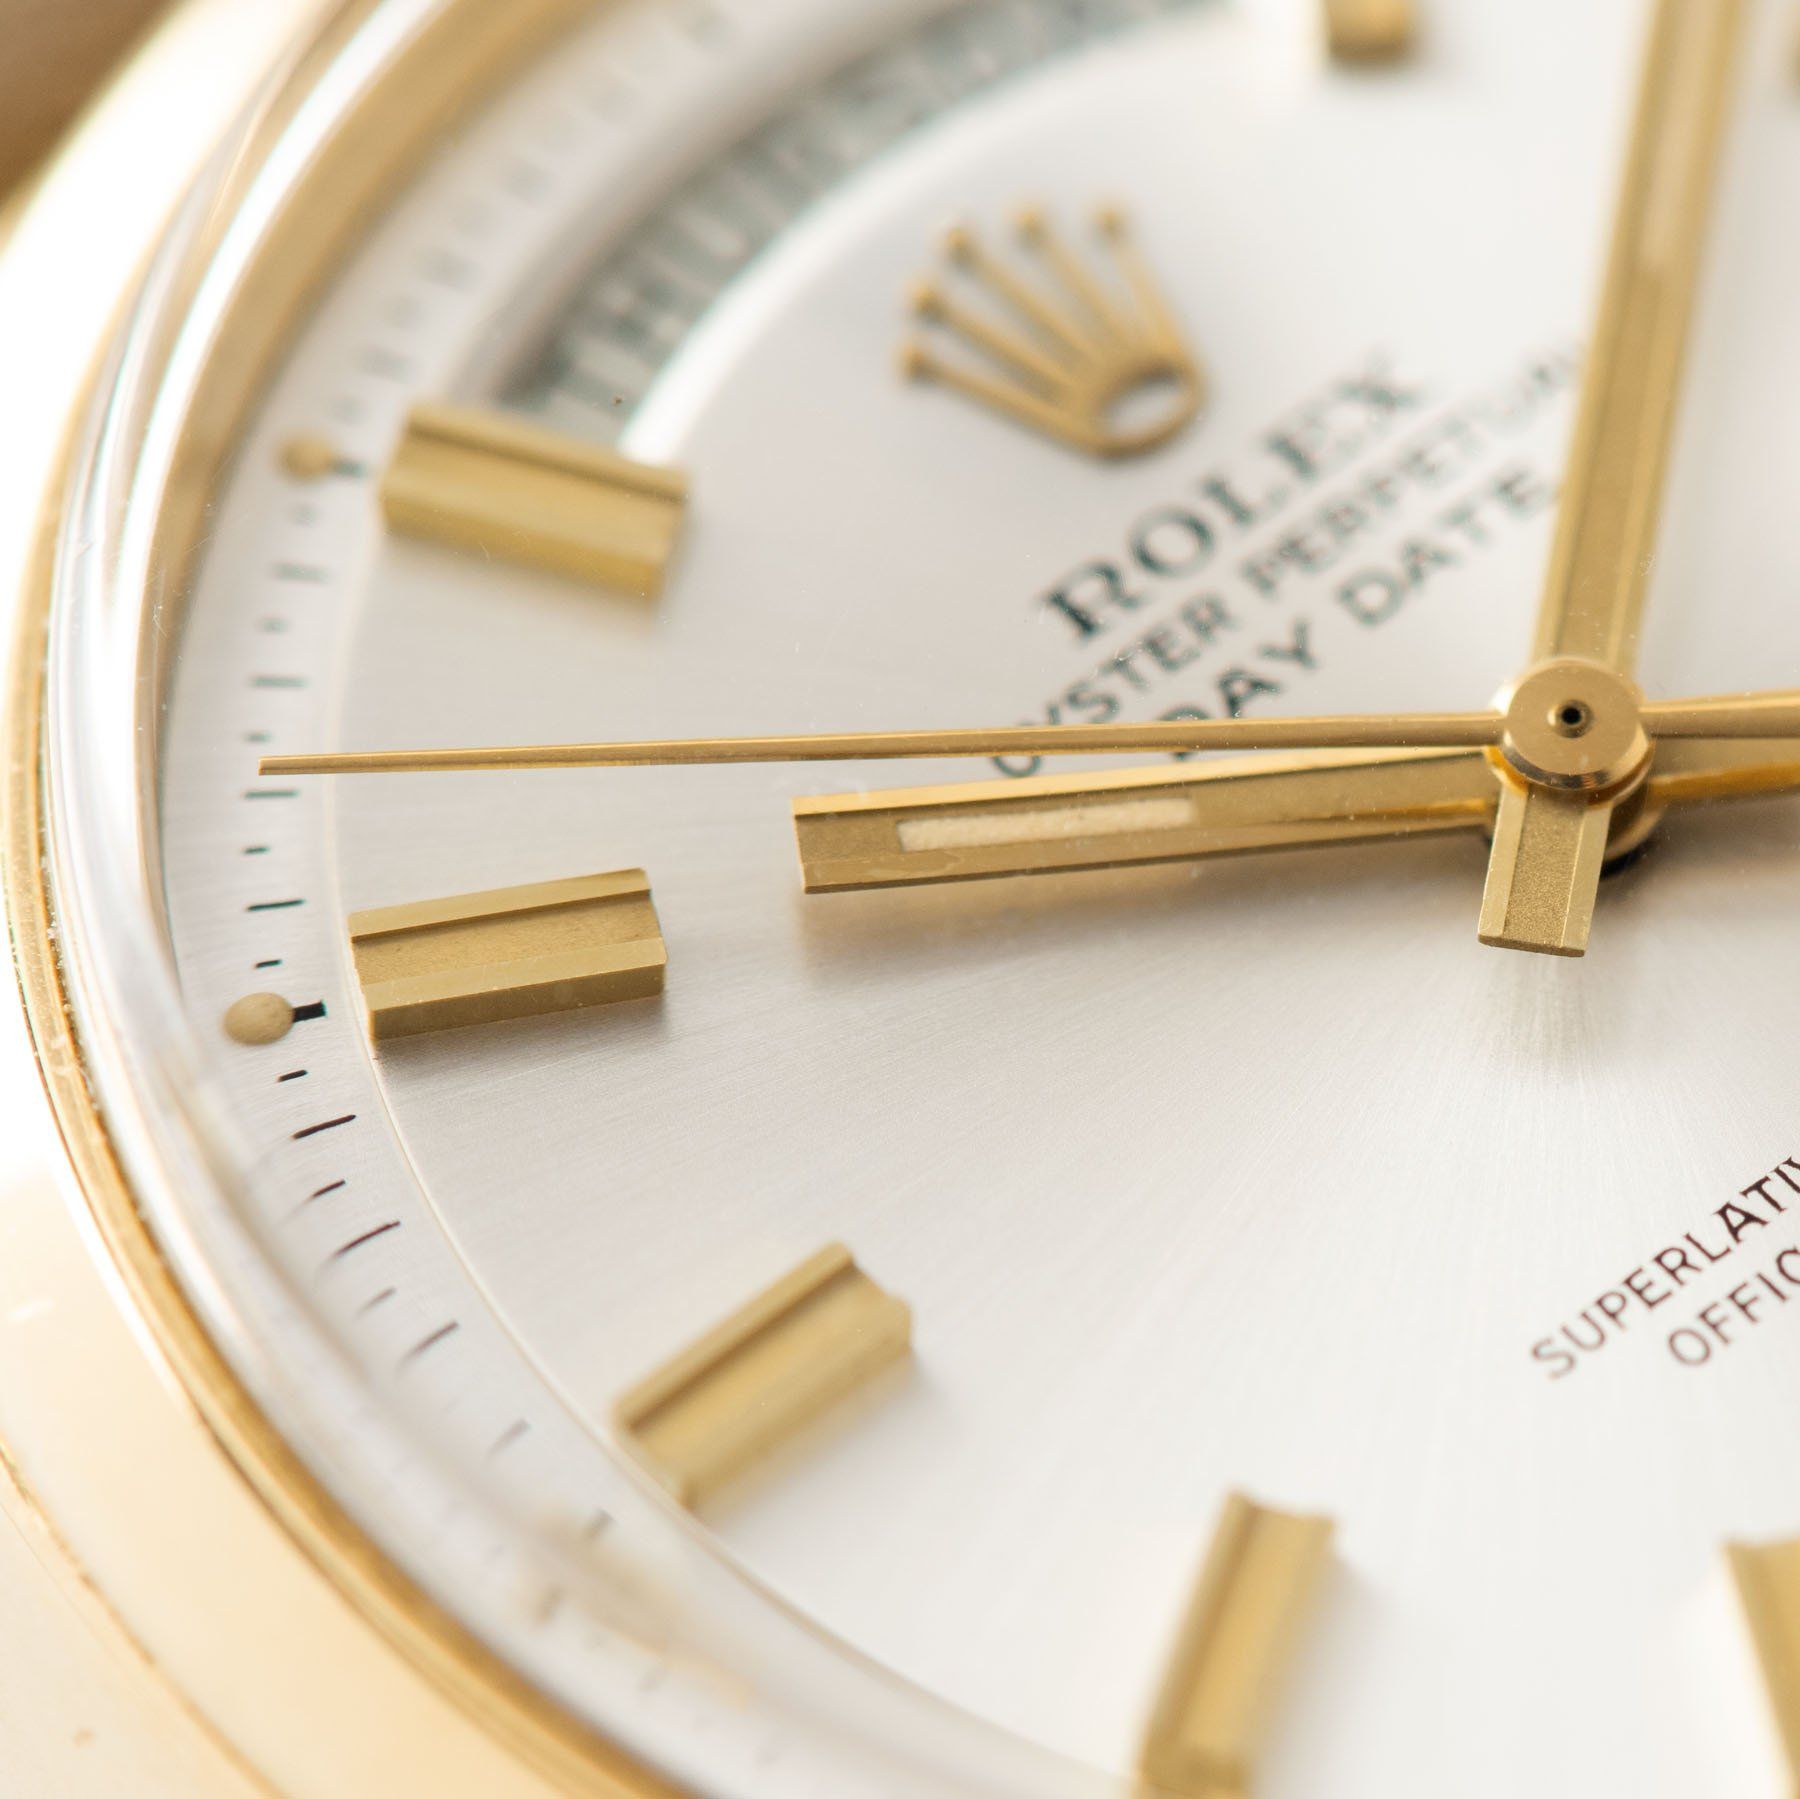 Rolex Day-Date Yellow Gold Wide Boy Dial 1802 on a Bulang and Sons Watch Strap